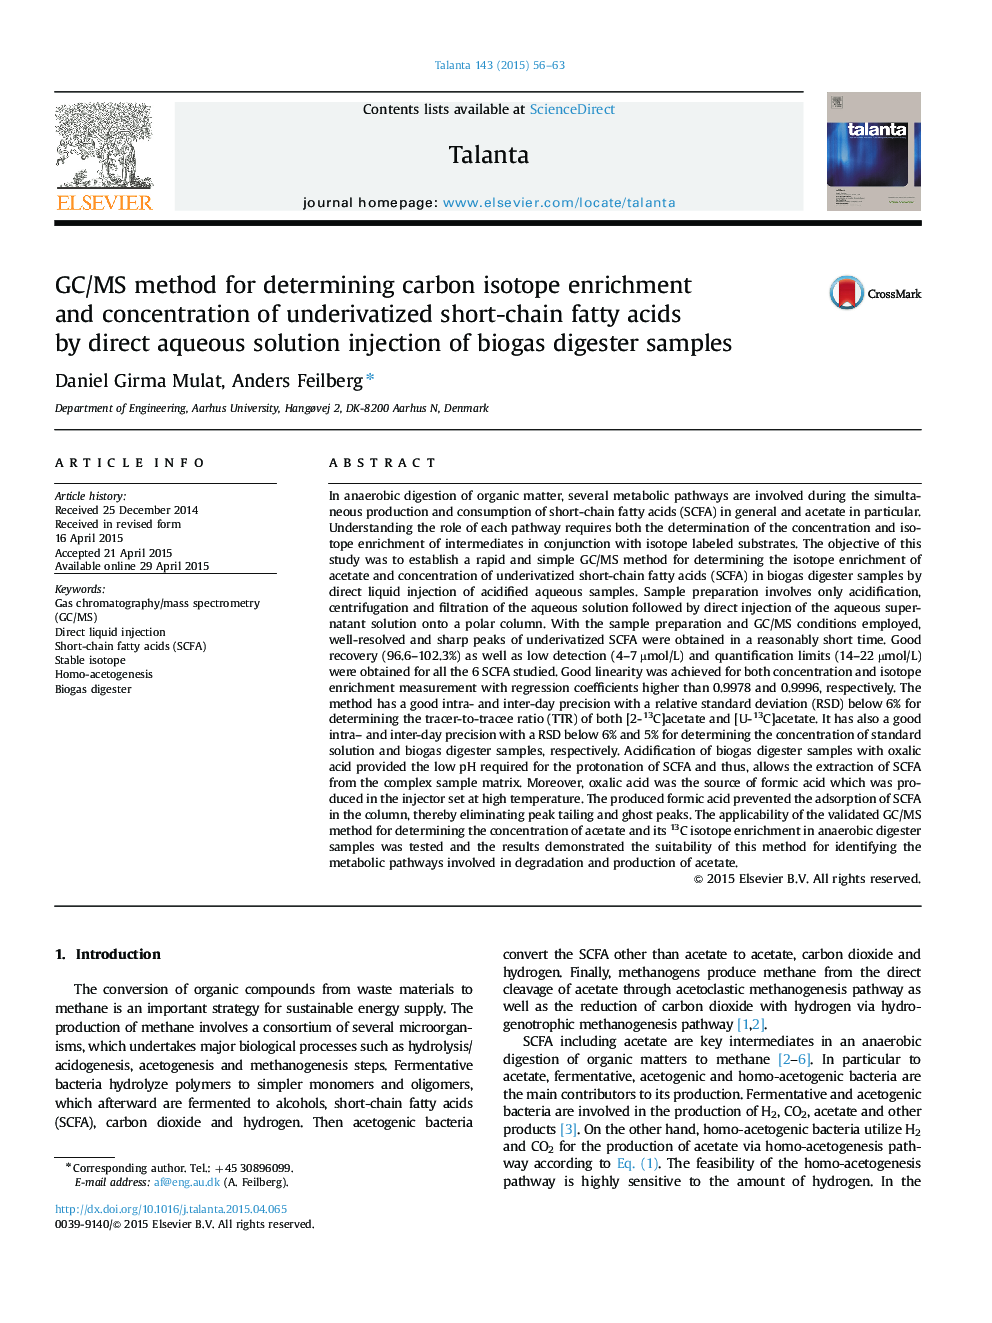 GC/MS method for determining carbon isotope enrichment and concentration of underivatized short-chain fatty acids by direct aqueous solution injection of biogas digester samples